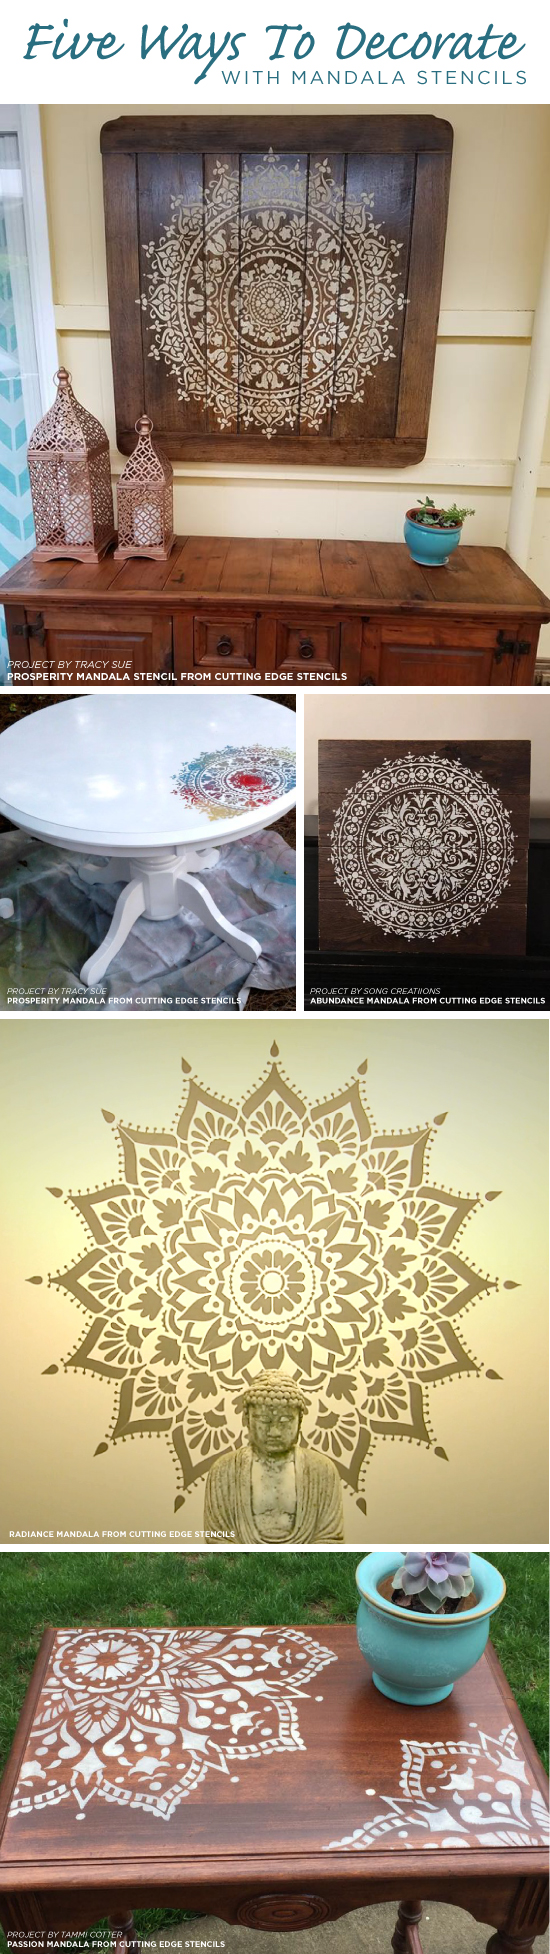 Cutting Edge Stencils shares five DIY decorating projects using Mandala Stencil patterns. http://www.cuttingedgestencils.com/mandala-stencils.html